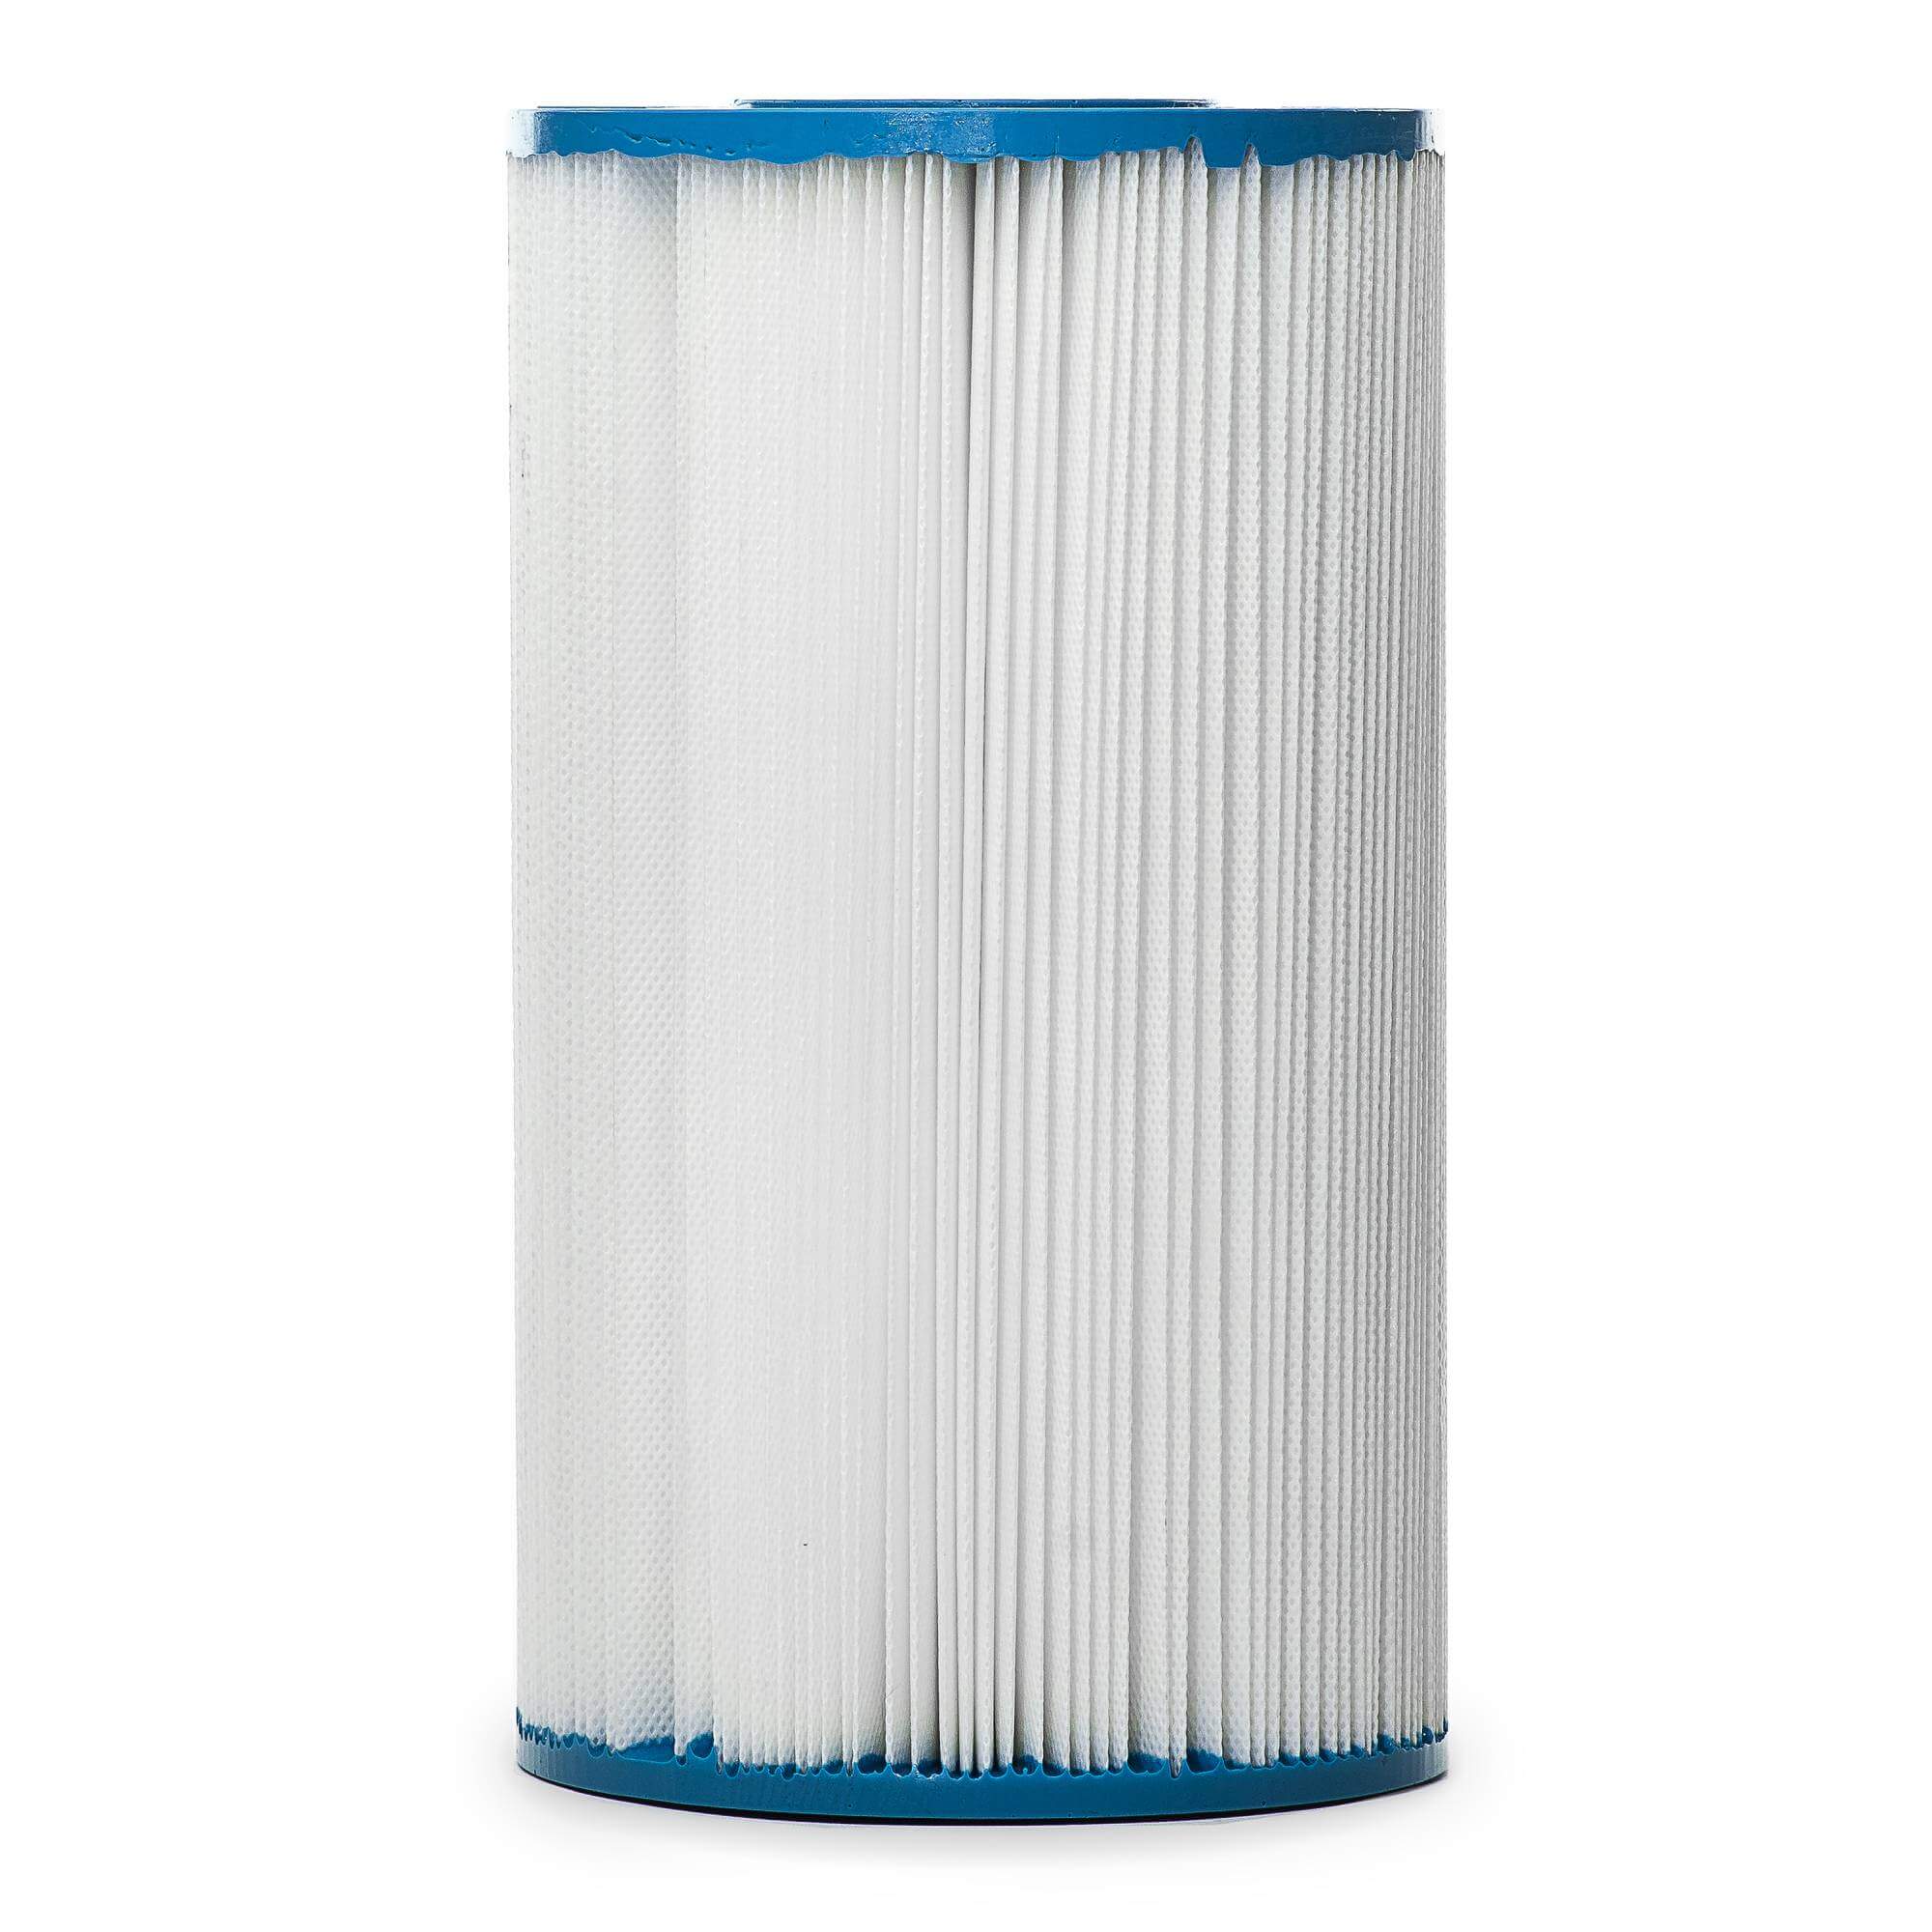 Filters Fast&reg; FF-0141 Replacement For Unicel C-6430